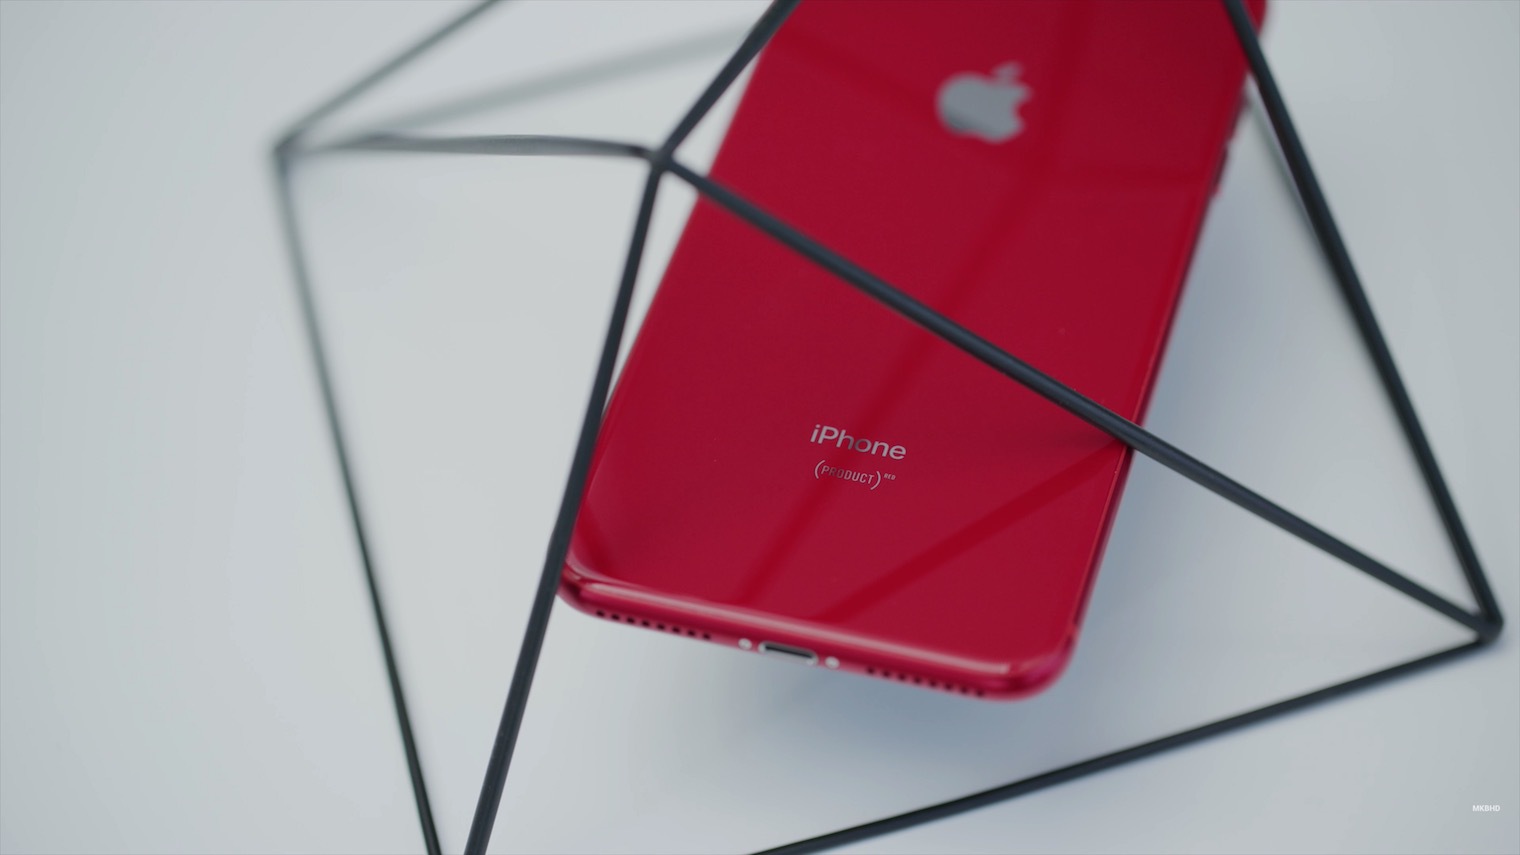 iPhone8Plus PRODUCT RED 256GB ジャンク-